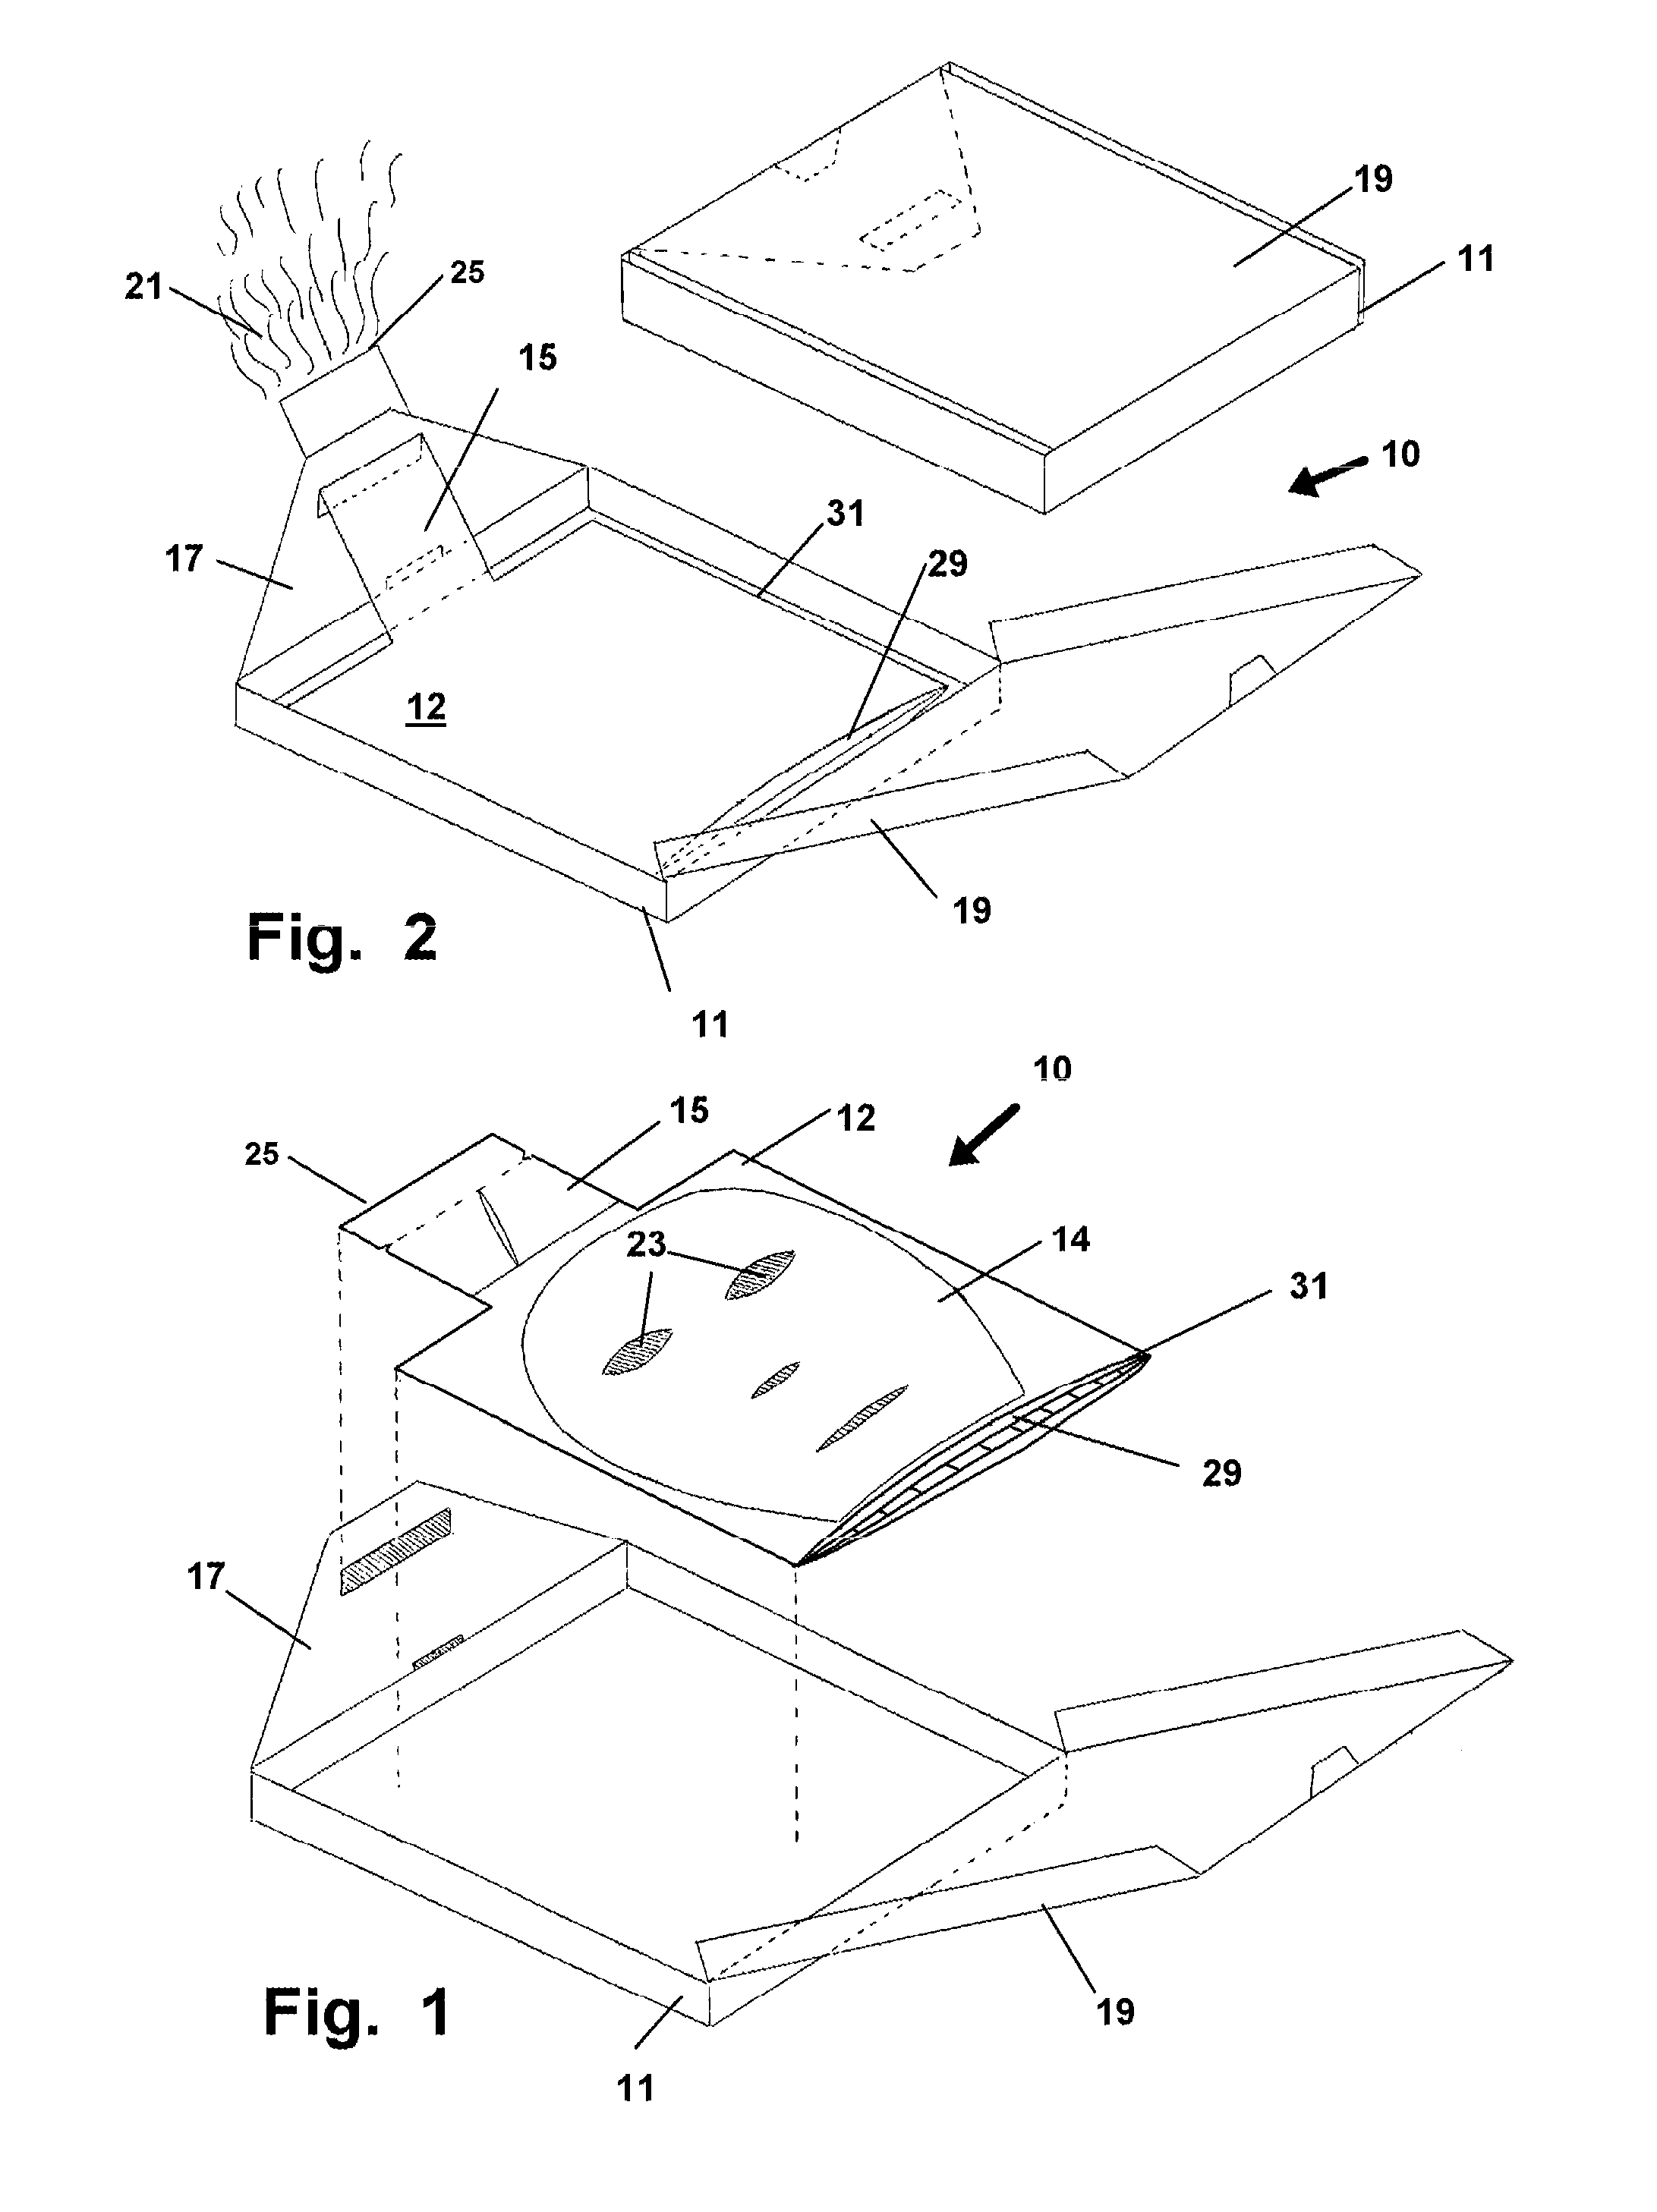 Method and apparatus of paraffin treatment of the skin